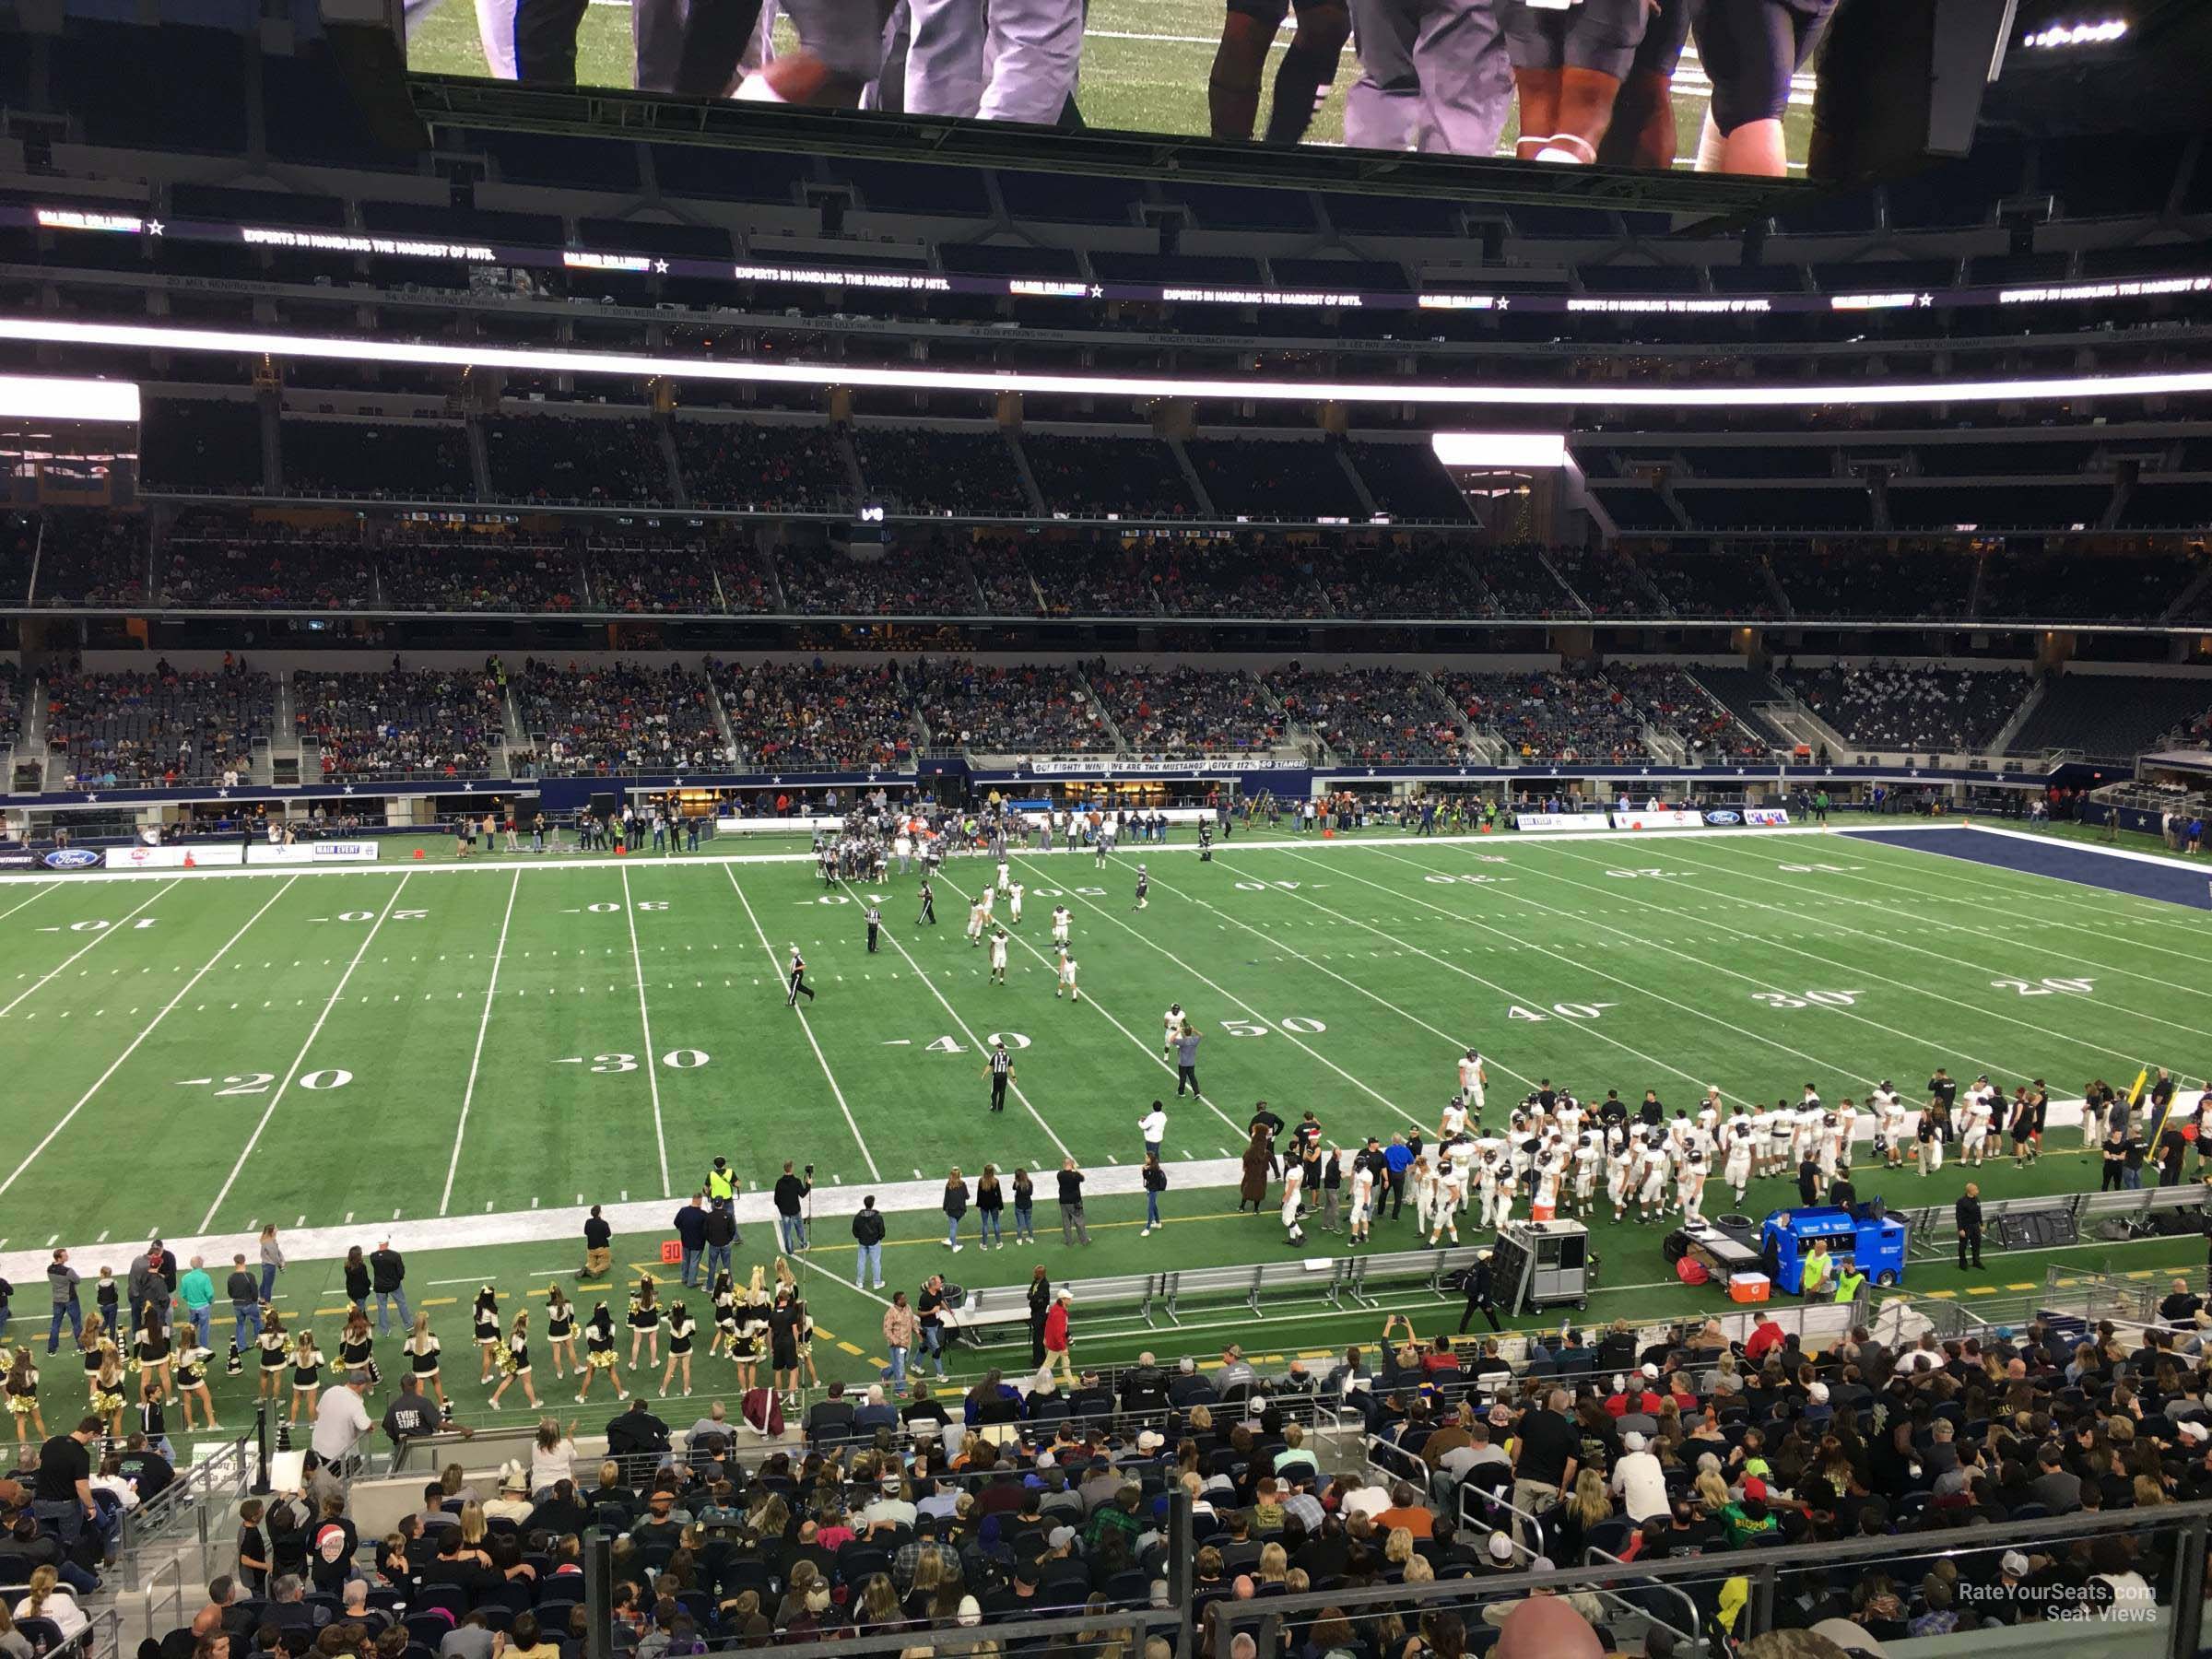 section c236, row 4 seat view  for football - at&t stadium (cowboys stadium)